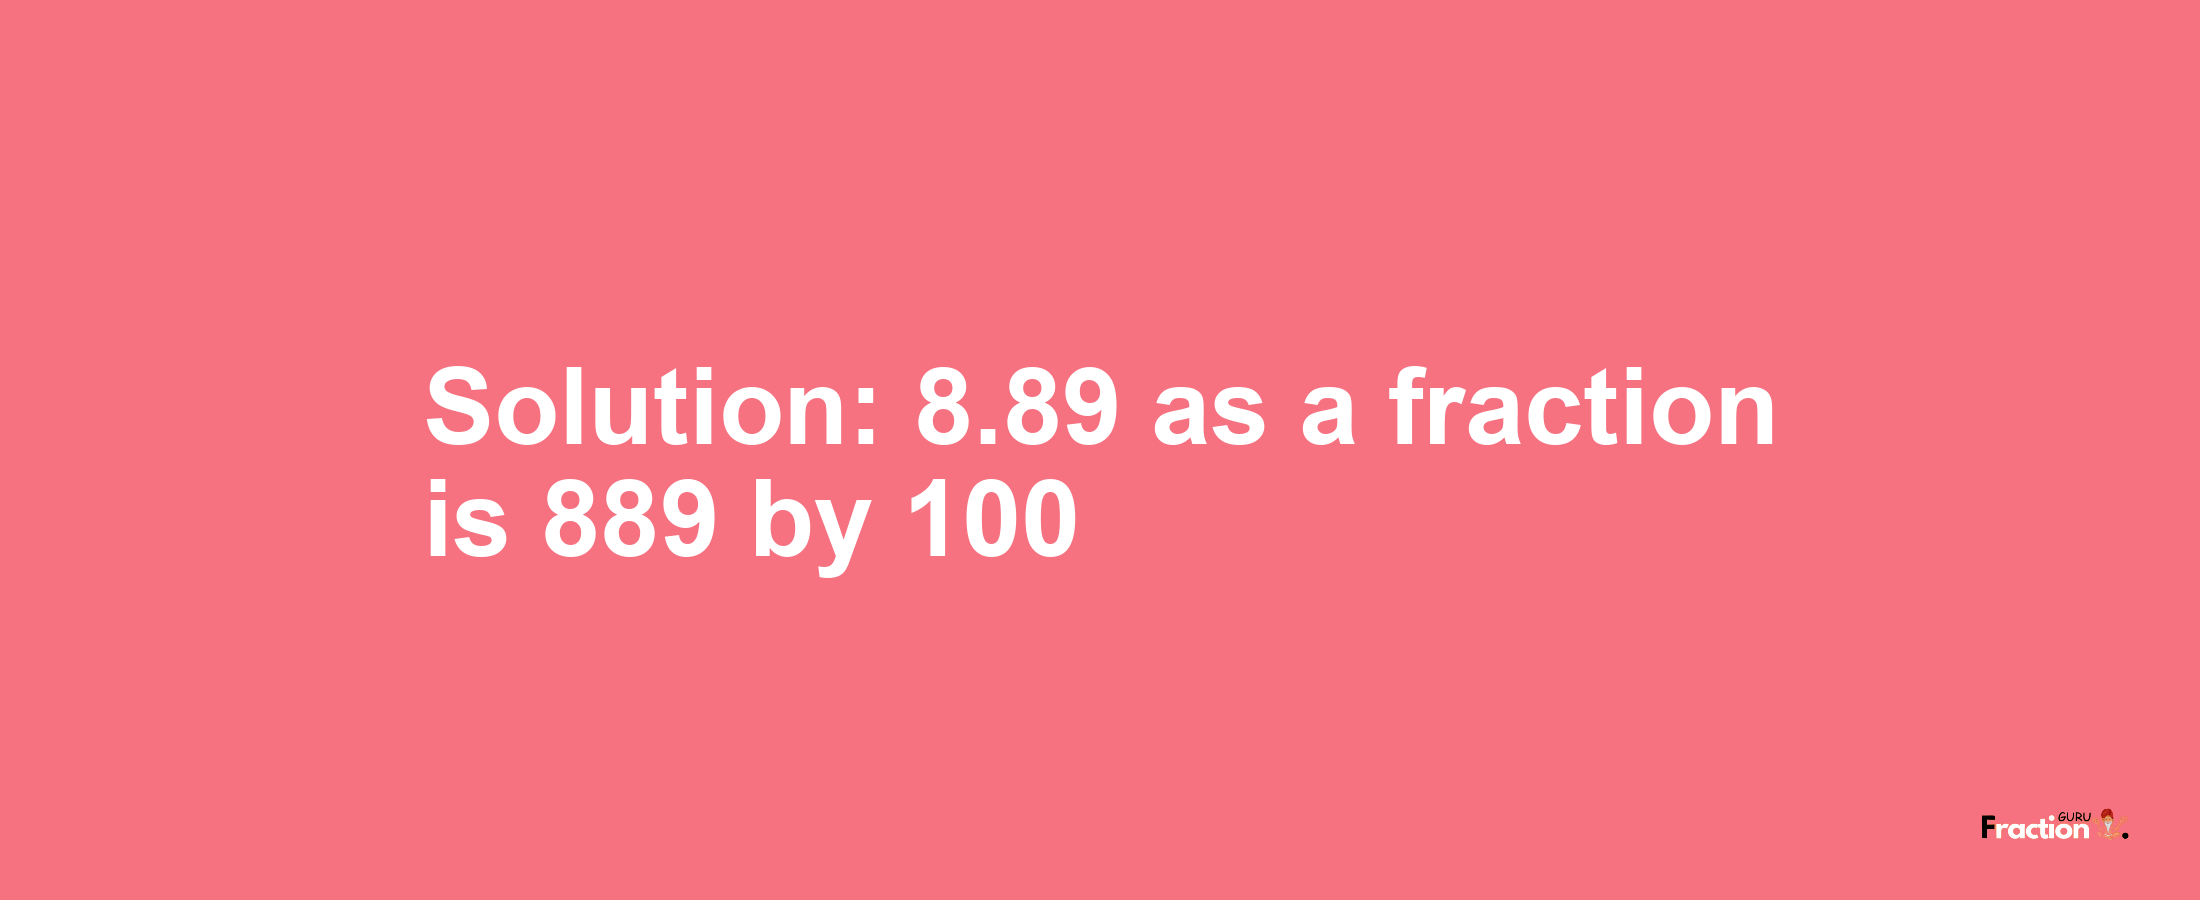 Solution:8.89 as a fraction is 889/100